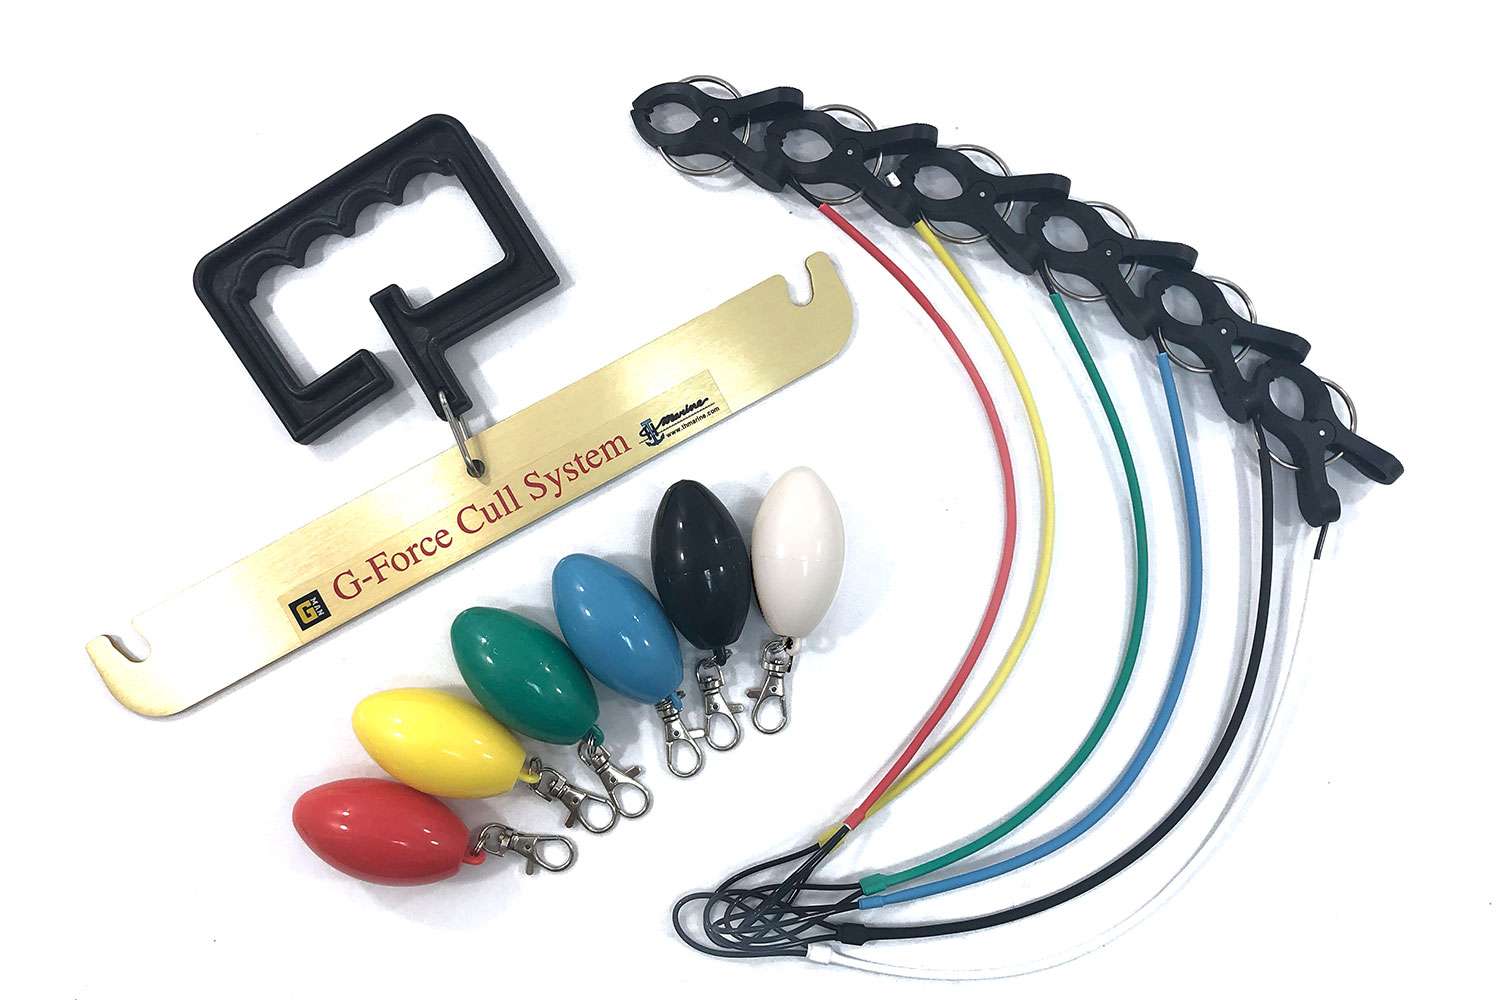     <B>T-H Marine Gen 2 Conservation Cull System</B>
<BR>With the clips, anglers who test the new system will immediately notice how they are completely retooled. The Simplified design for easier use is built to be durable, using quality plastic molding and stainless steel. Itâs great with holding tight on a fish's lips, using stronger plastic and a spring-loaded grip. The system is designed to be quick and easy, ideal for one-handed use.
<BR>
<B>MSRP: $59.99</B></p>

<p><a href=